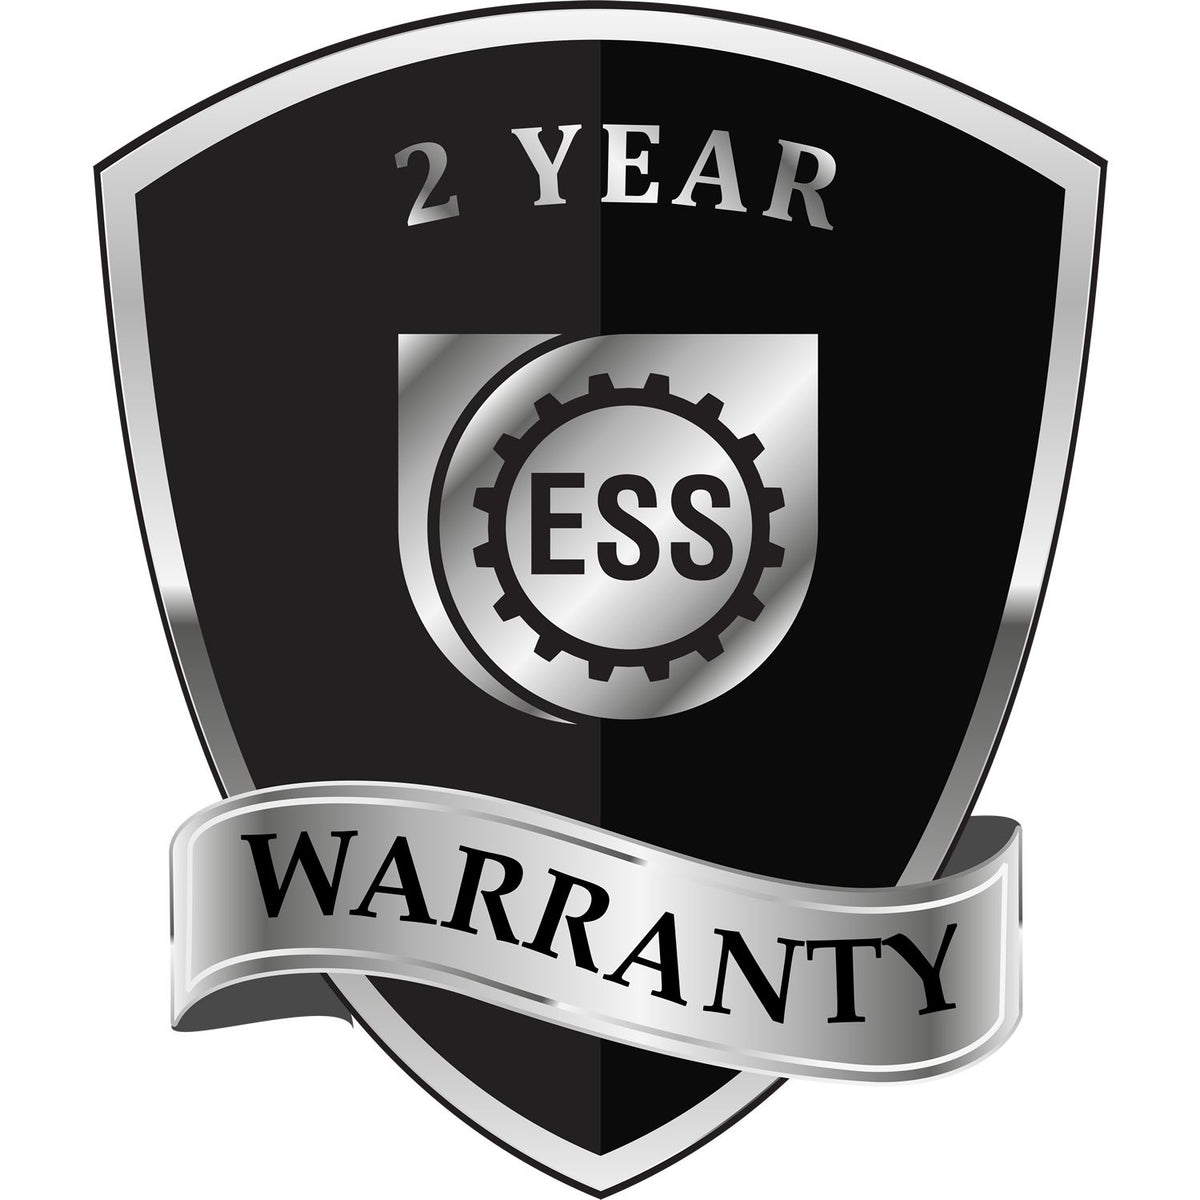 A black and silver badge or emblem showing warranty information for the Gift Texas Engineer Seal